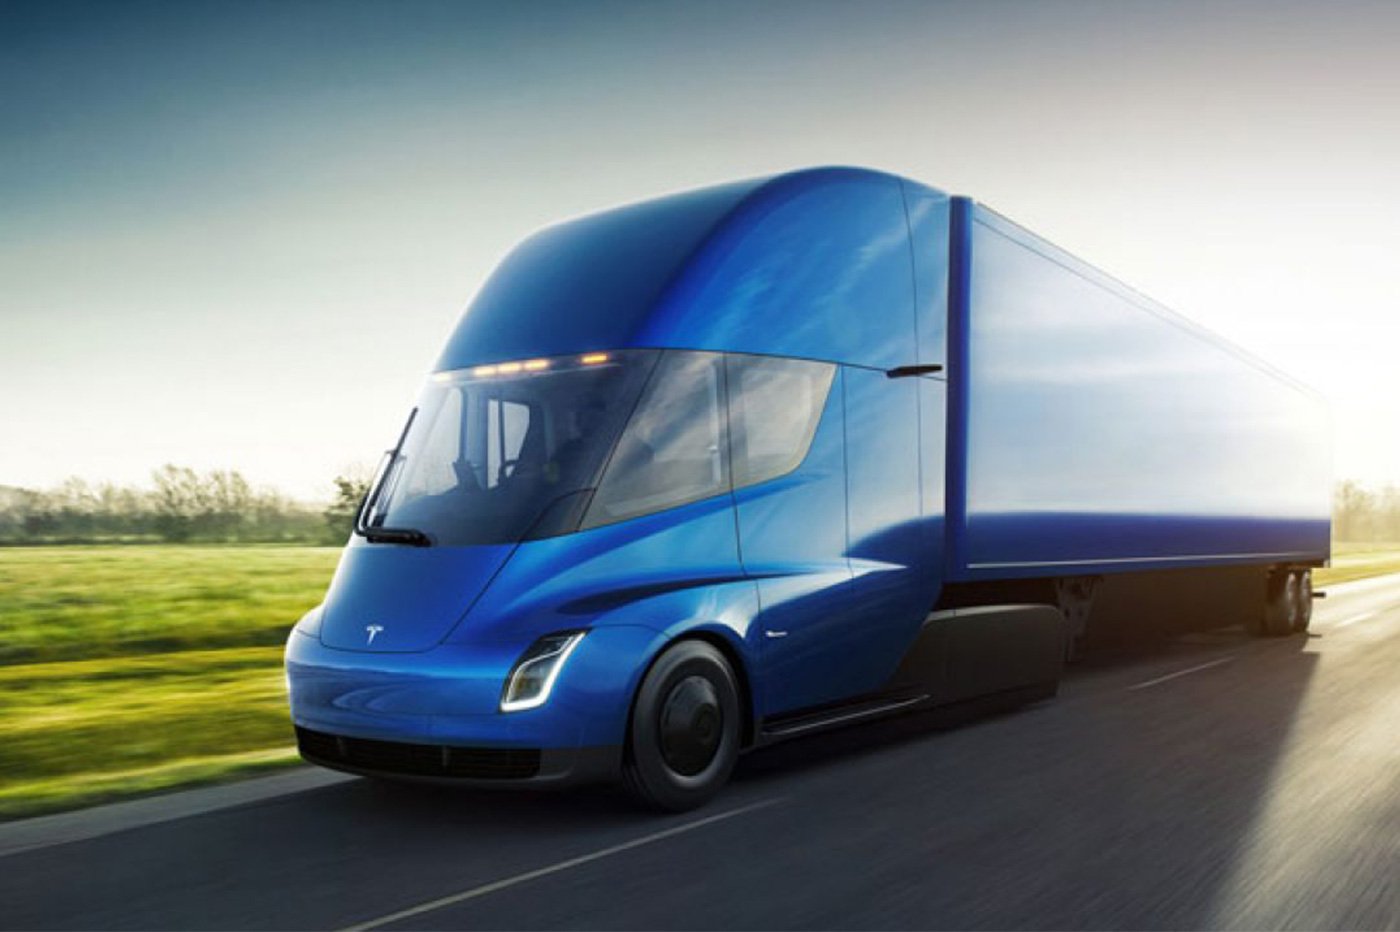 Europe is preparing for the arrival of the Tesla Semi, Elon Musk's electric giant